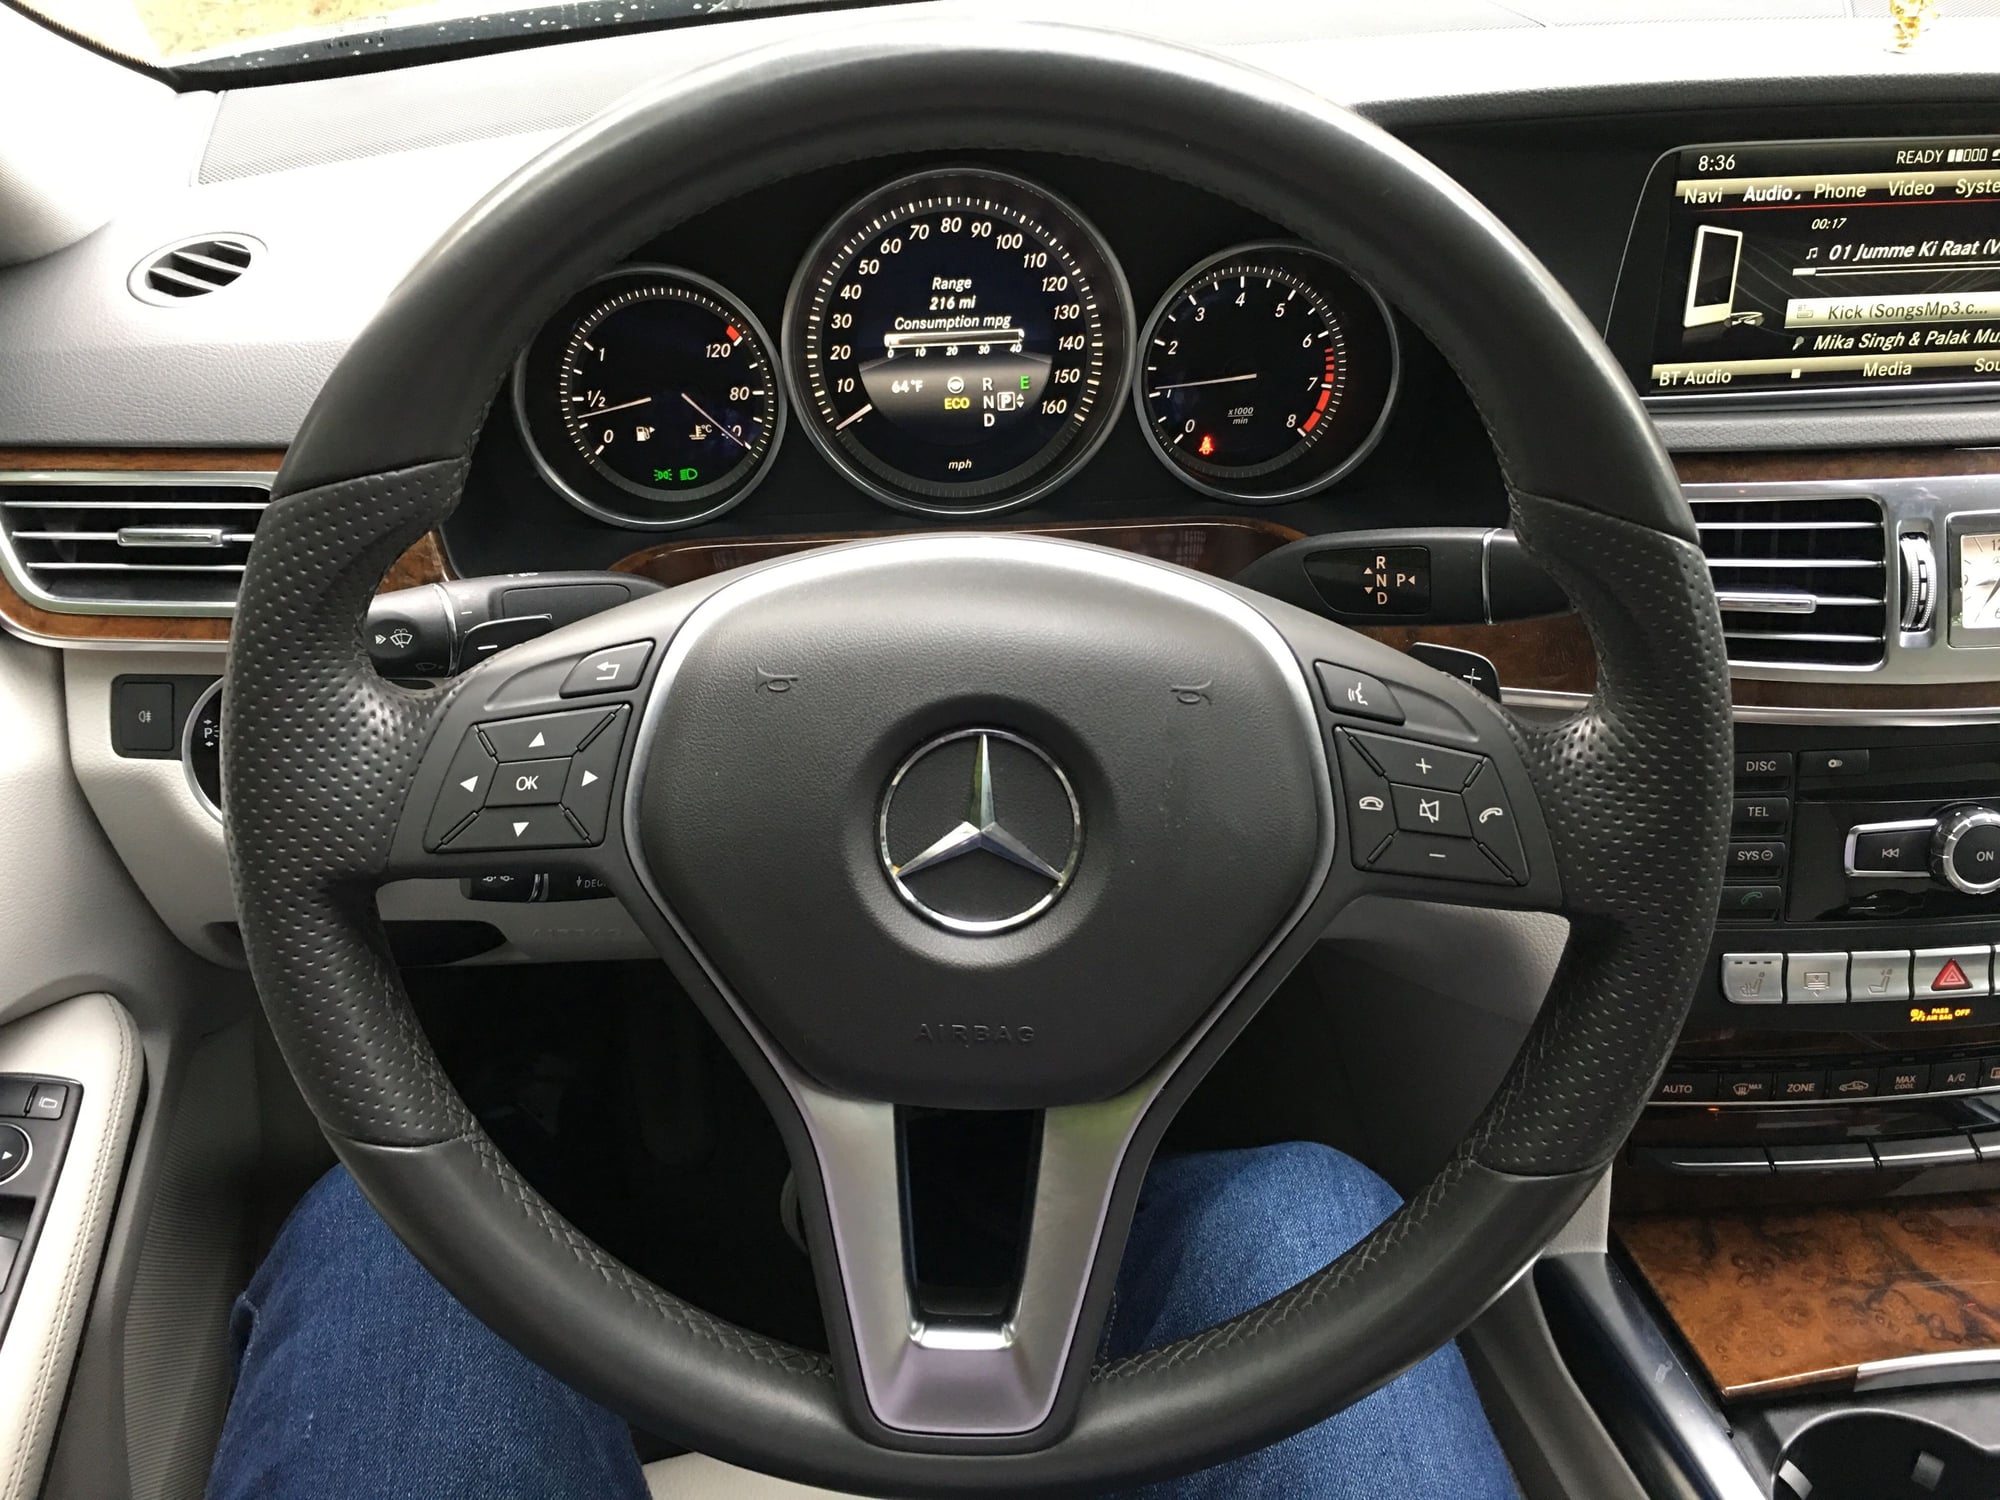 Steering/Suspension - 2014 E350 Leather grey 3-spoke steering wheel. - Used - 2010 to 2016 Mercedes-Benz E350 - Charlotte, NC 28262, United States